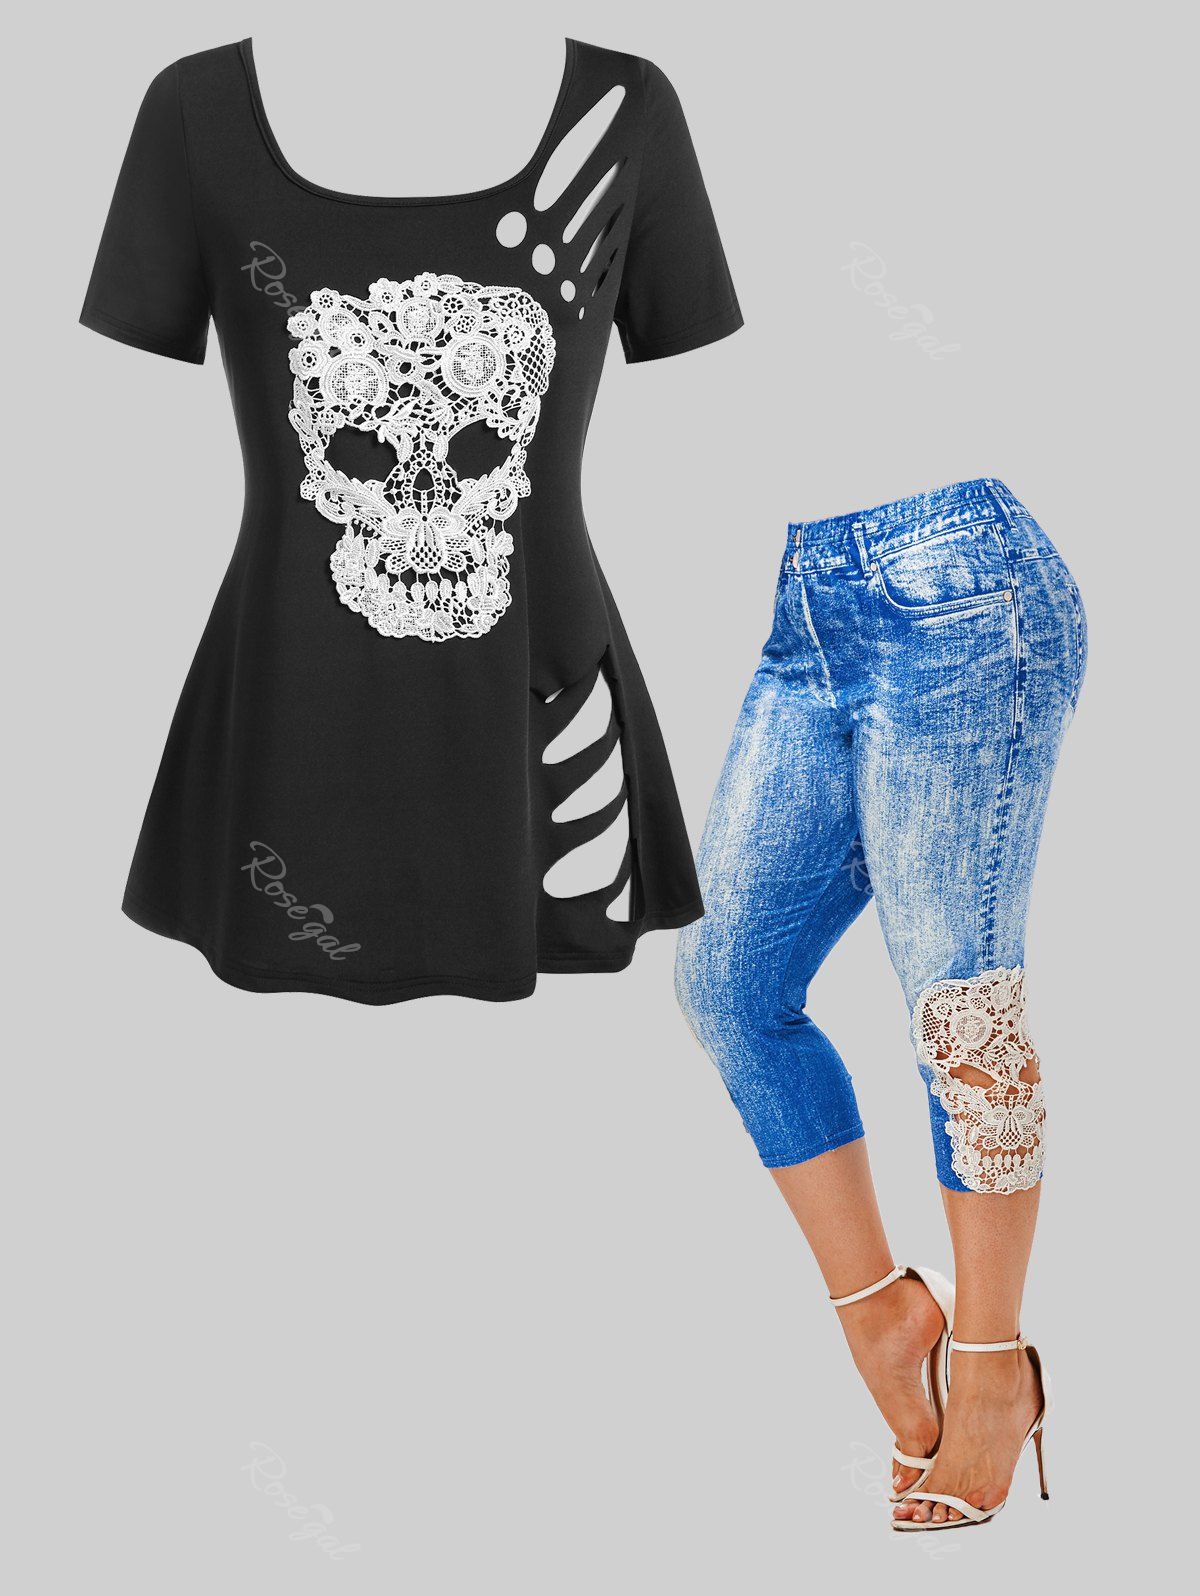 New Gothic Lace Skulls Ripped Tee and Capri Leggings Plus Size Summer Outfit  